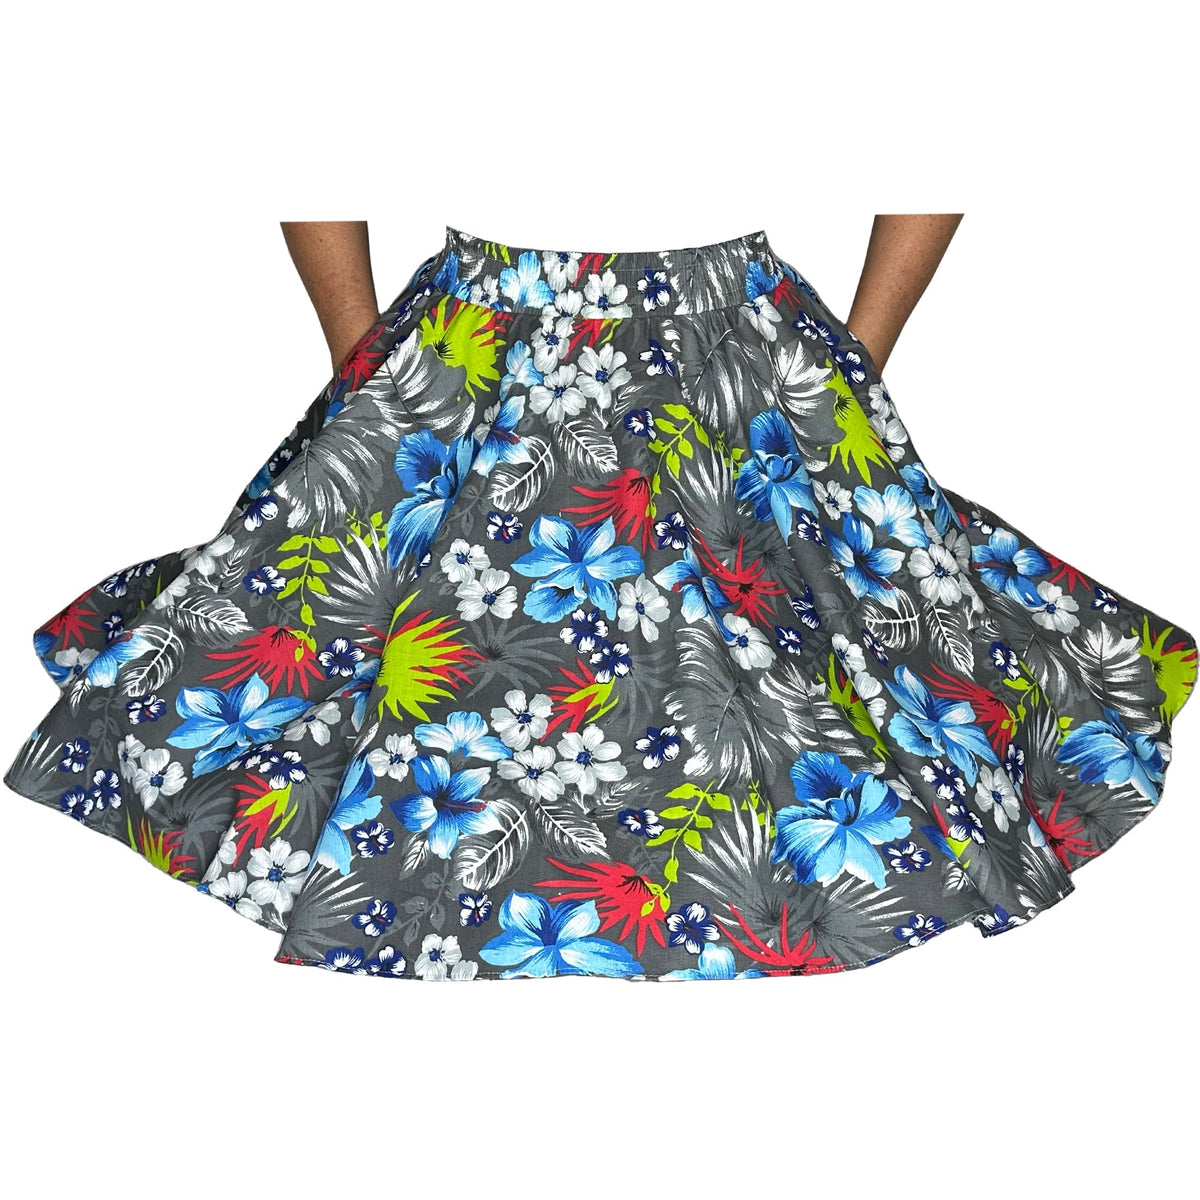 A person holds out a Square Up Fashions Tropical Hawaiian Square Dance Skirt with a gray background and colorful Hibiscus flowers, including blue, white, and red blossoms.